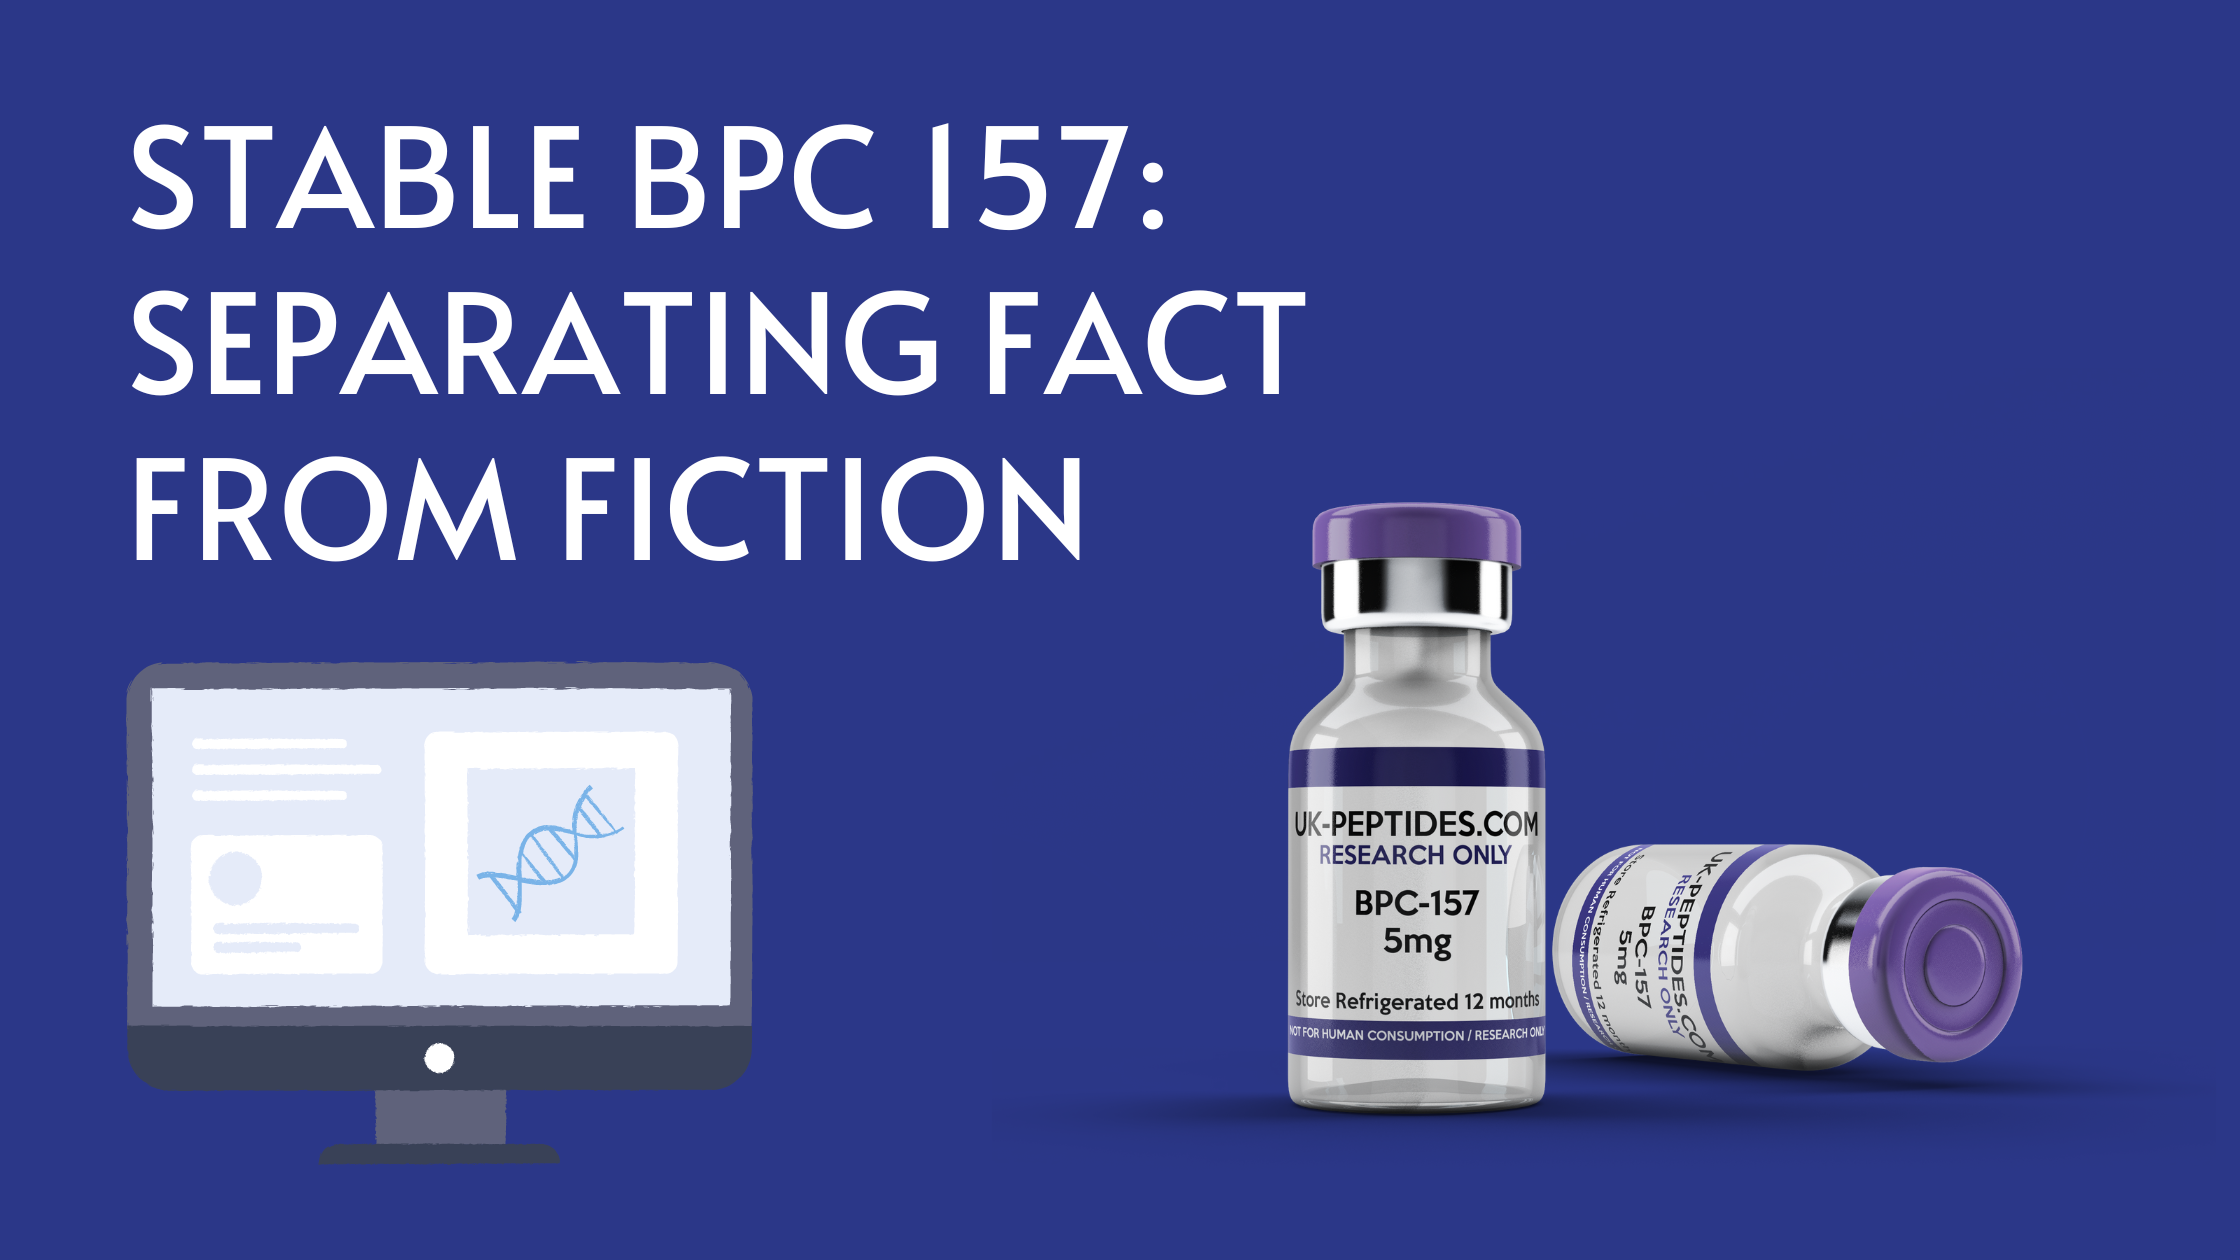 Stable BPC 157 - The Facts